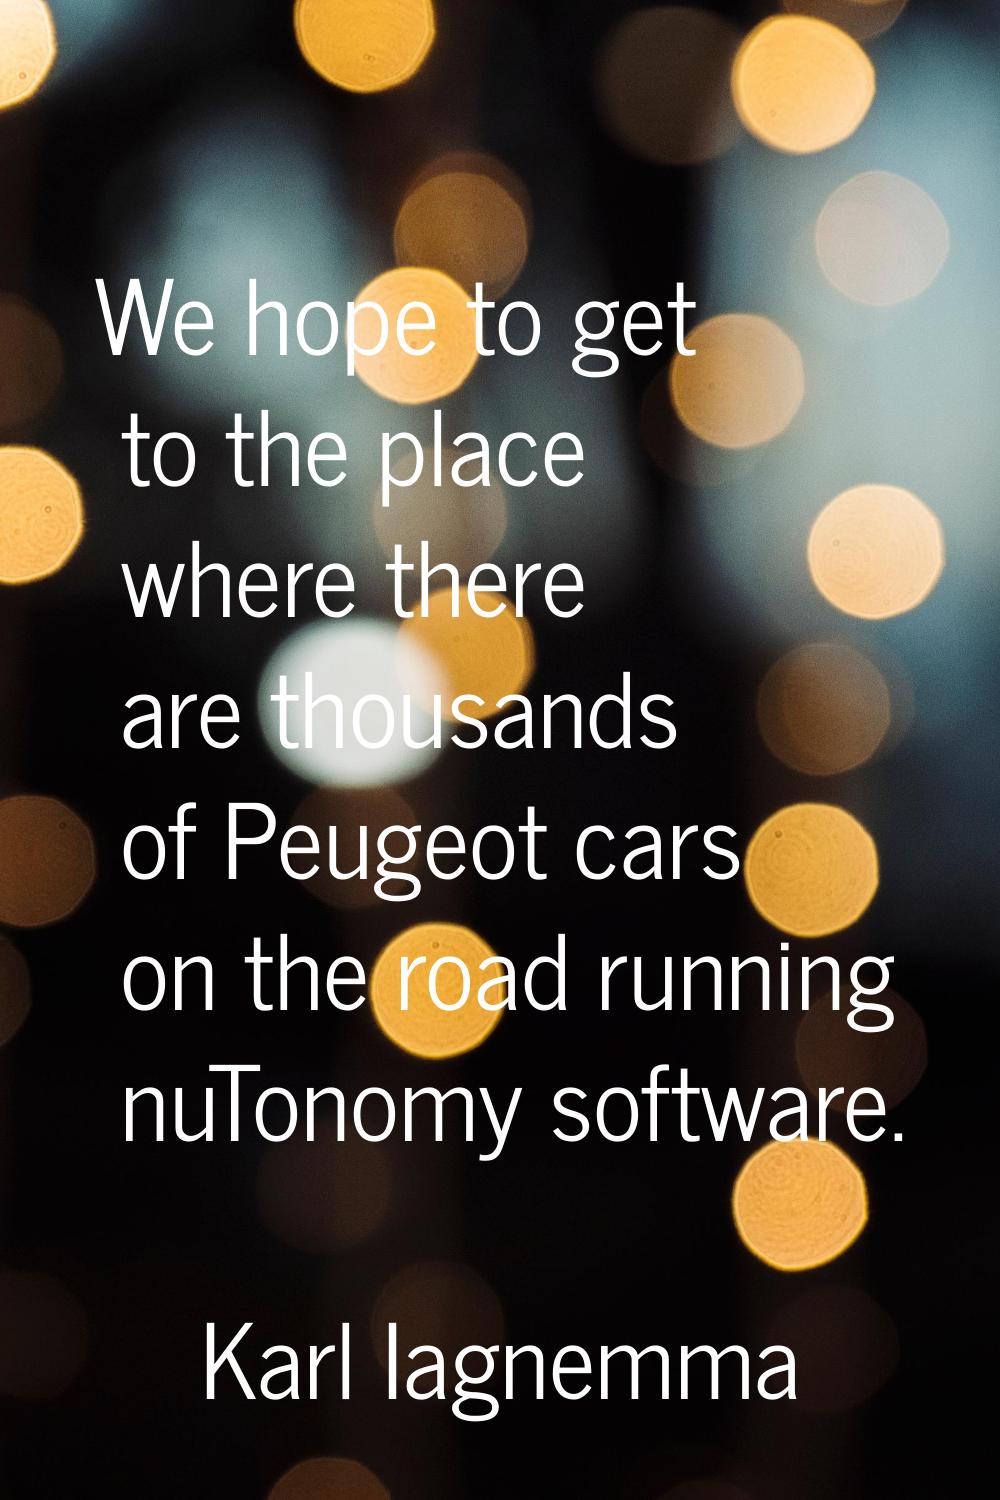 We hope to get to the place where there are thousands of Peugeot cars on the road running nuTonomy 